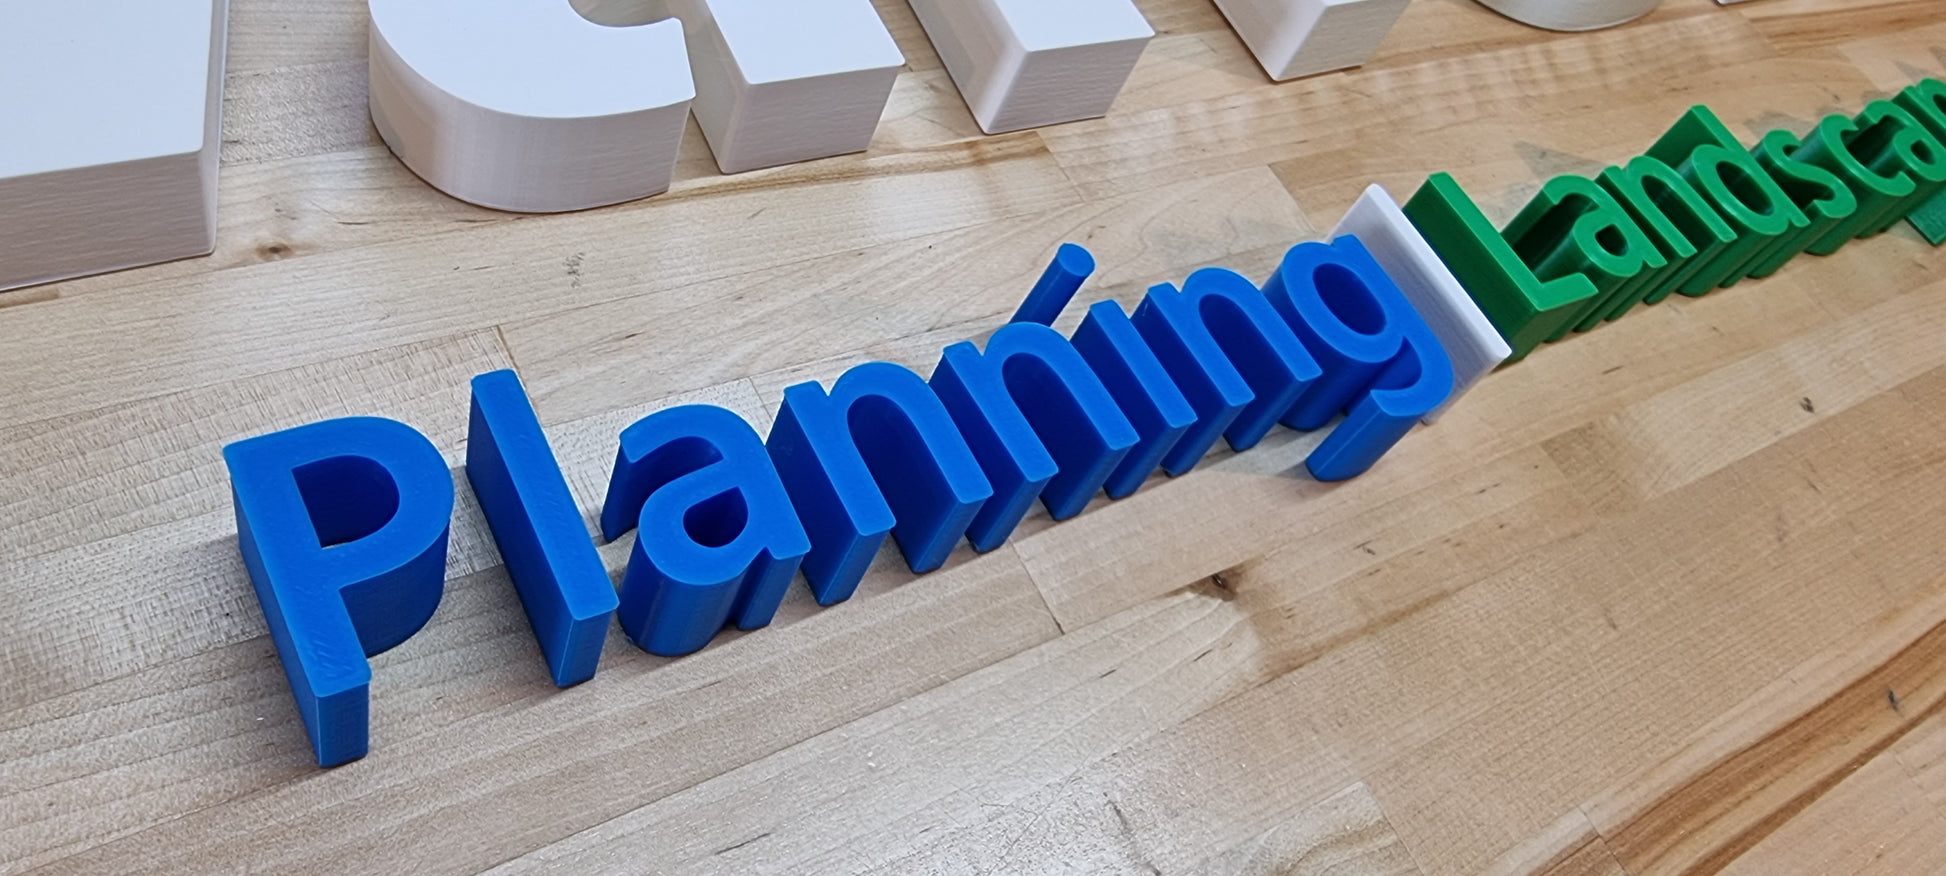 Office Door Signs - 1 Inch letters make a bold Statement